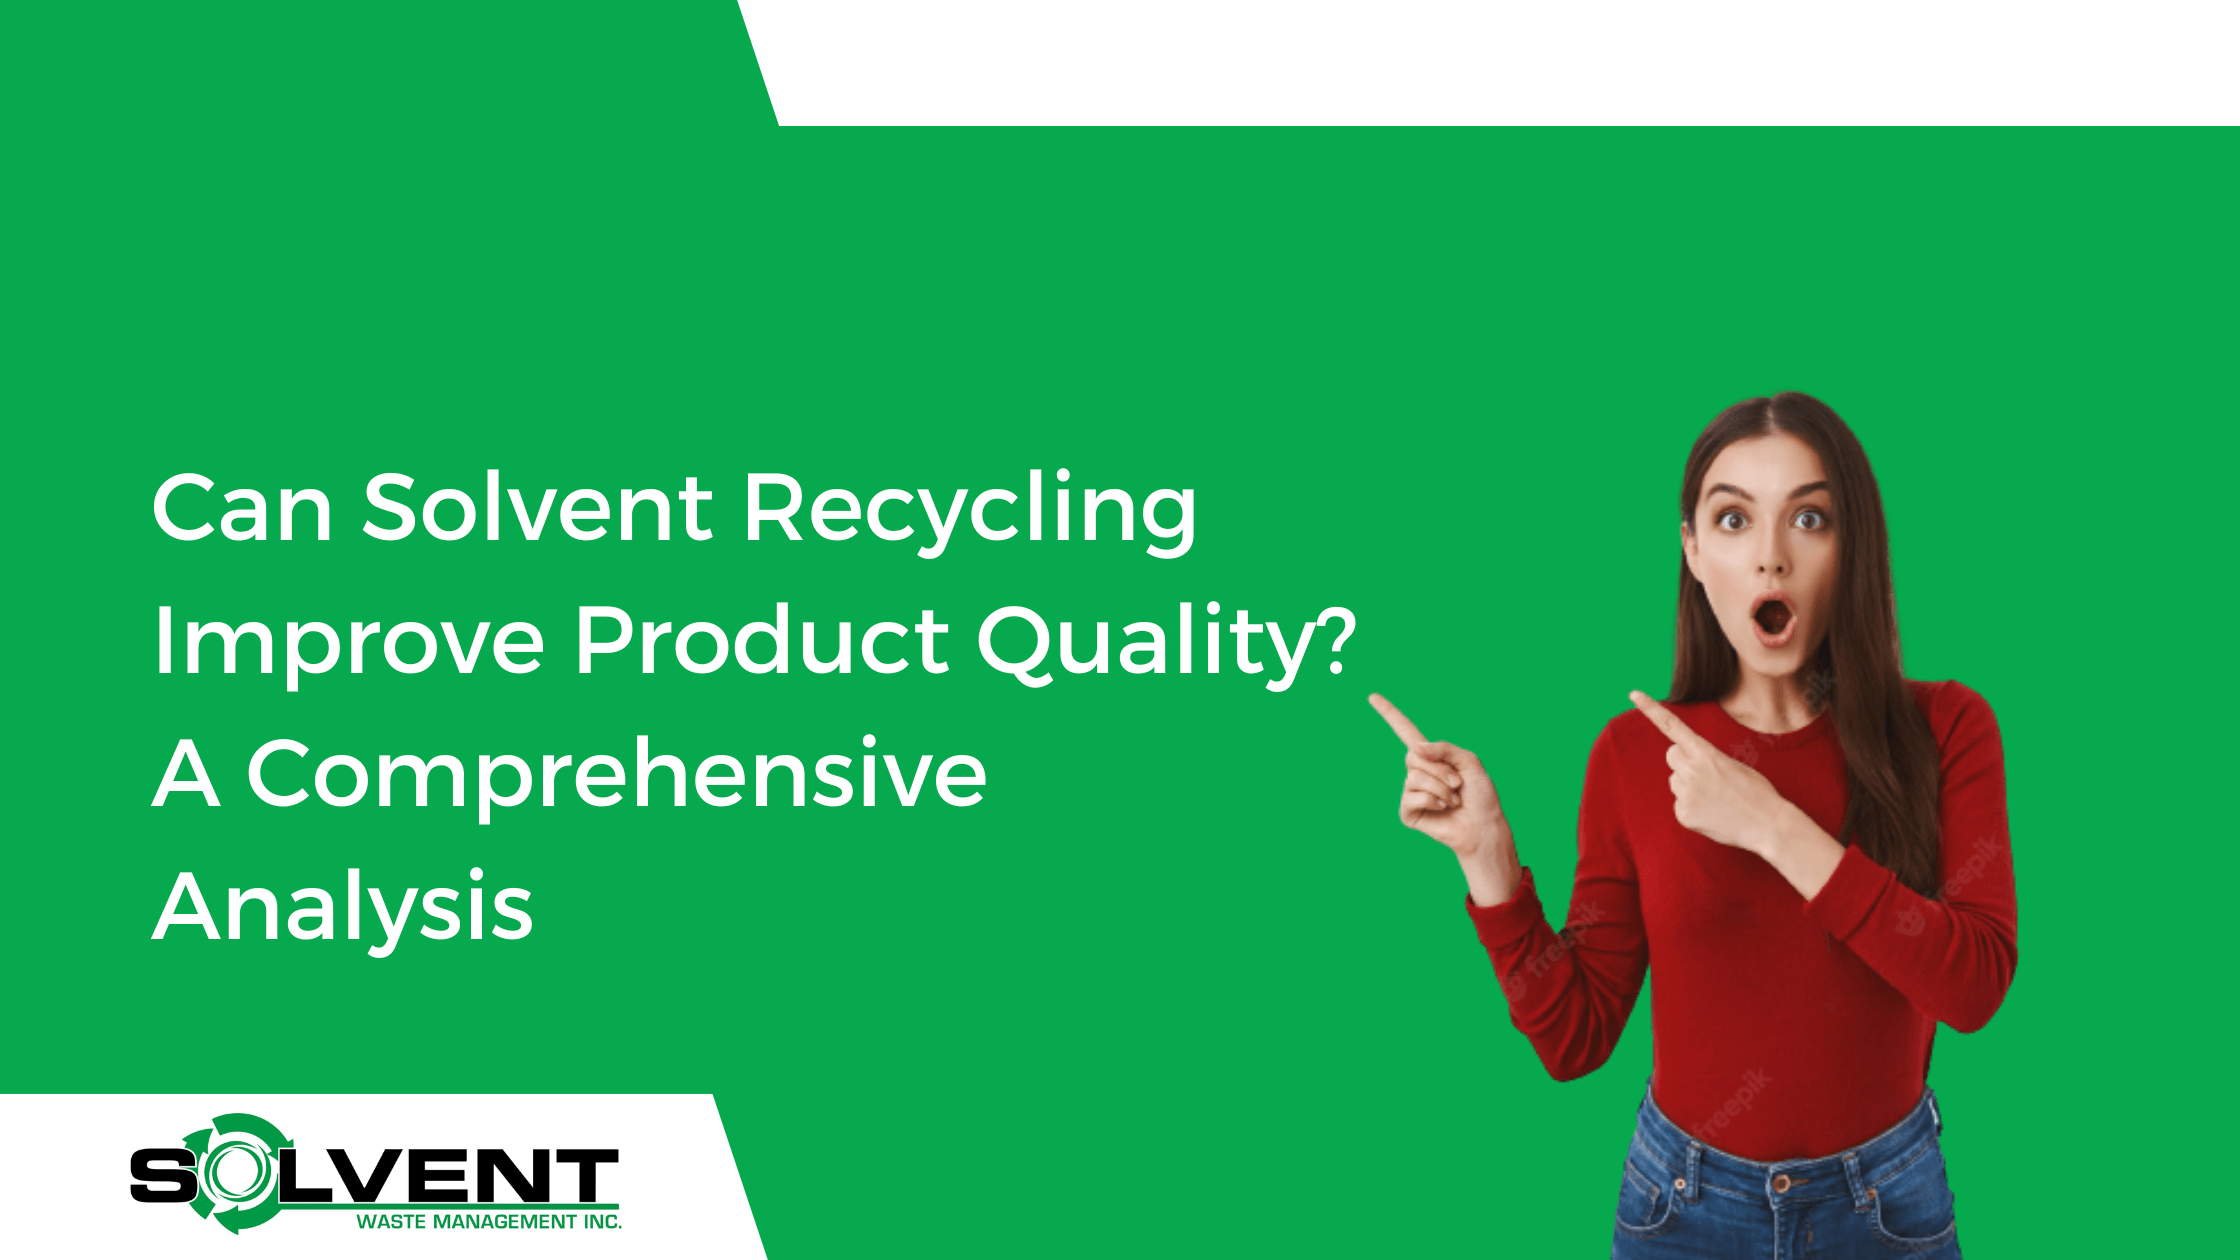 Can Solvent Recycling Improve Product Quality?